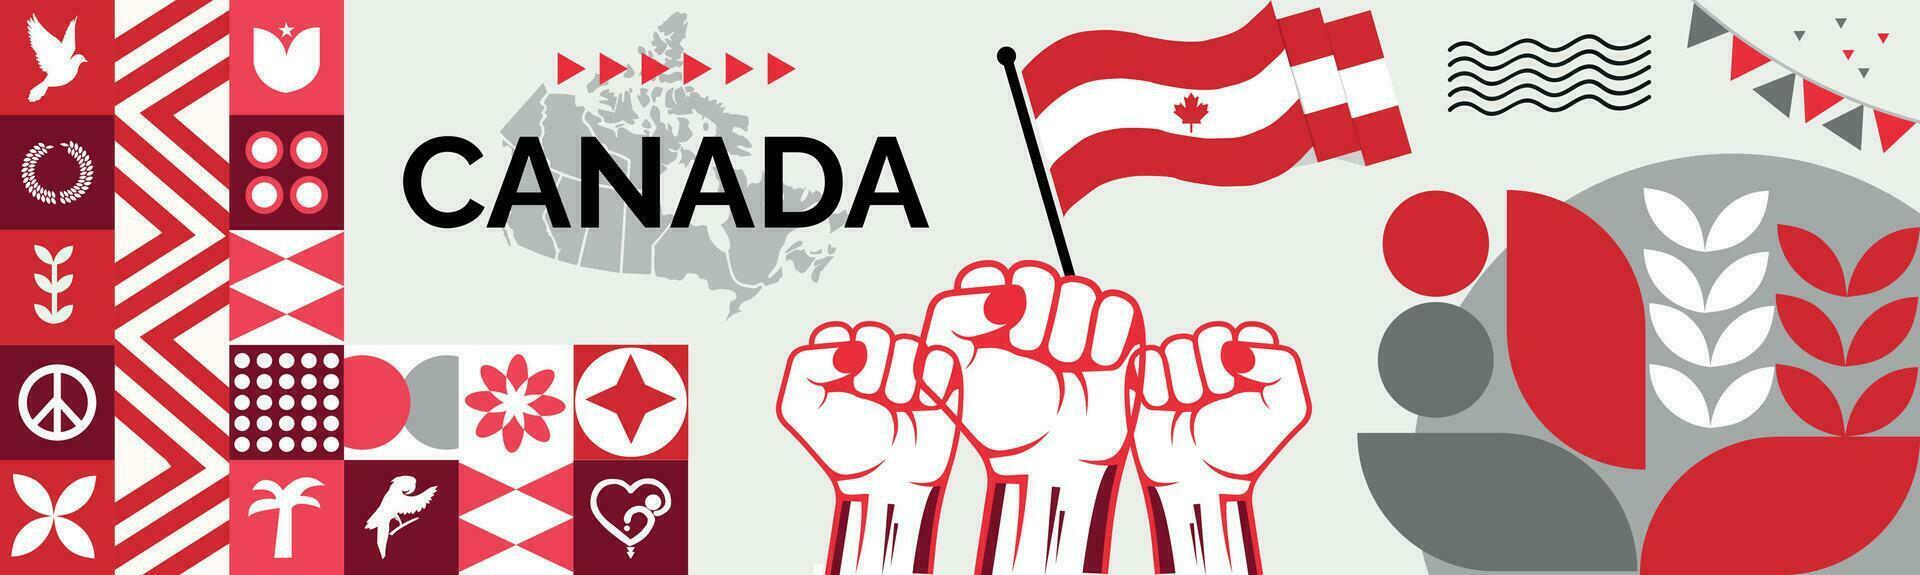 CANADA Map and raised fists. National day or Independence day design for CANADA celebration. Modern retro design with abstract icons. Vector illustration.